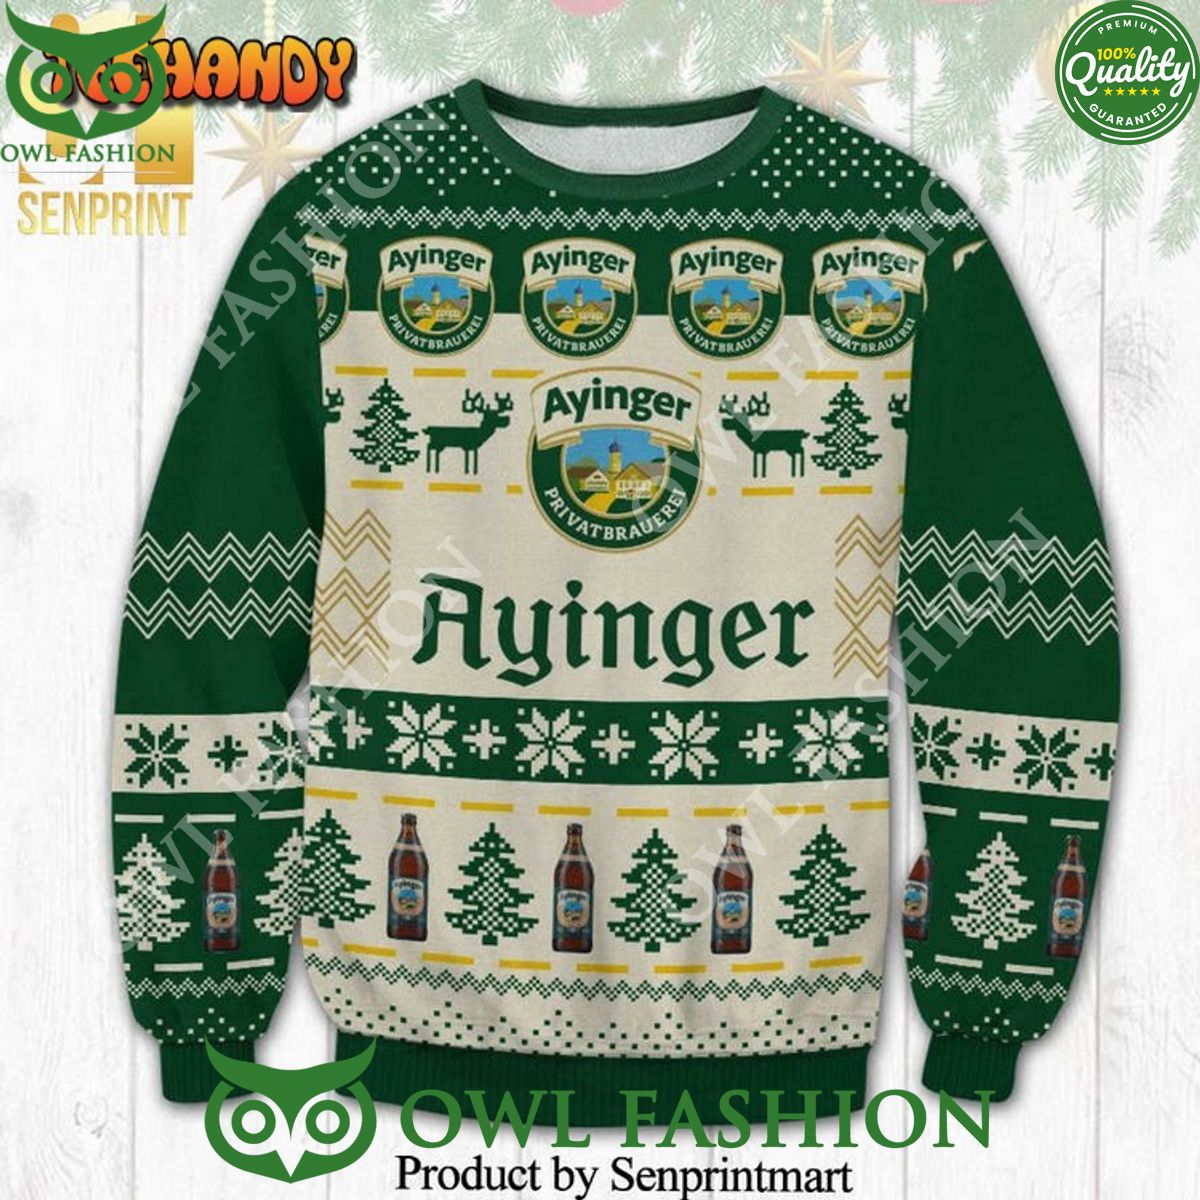 ayinger beer brewery privatbrauerei knitted ugly sweater 1 v7o90.jpg